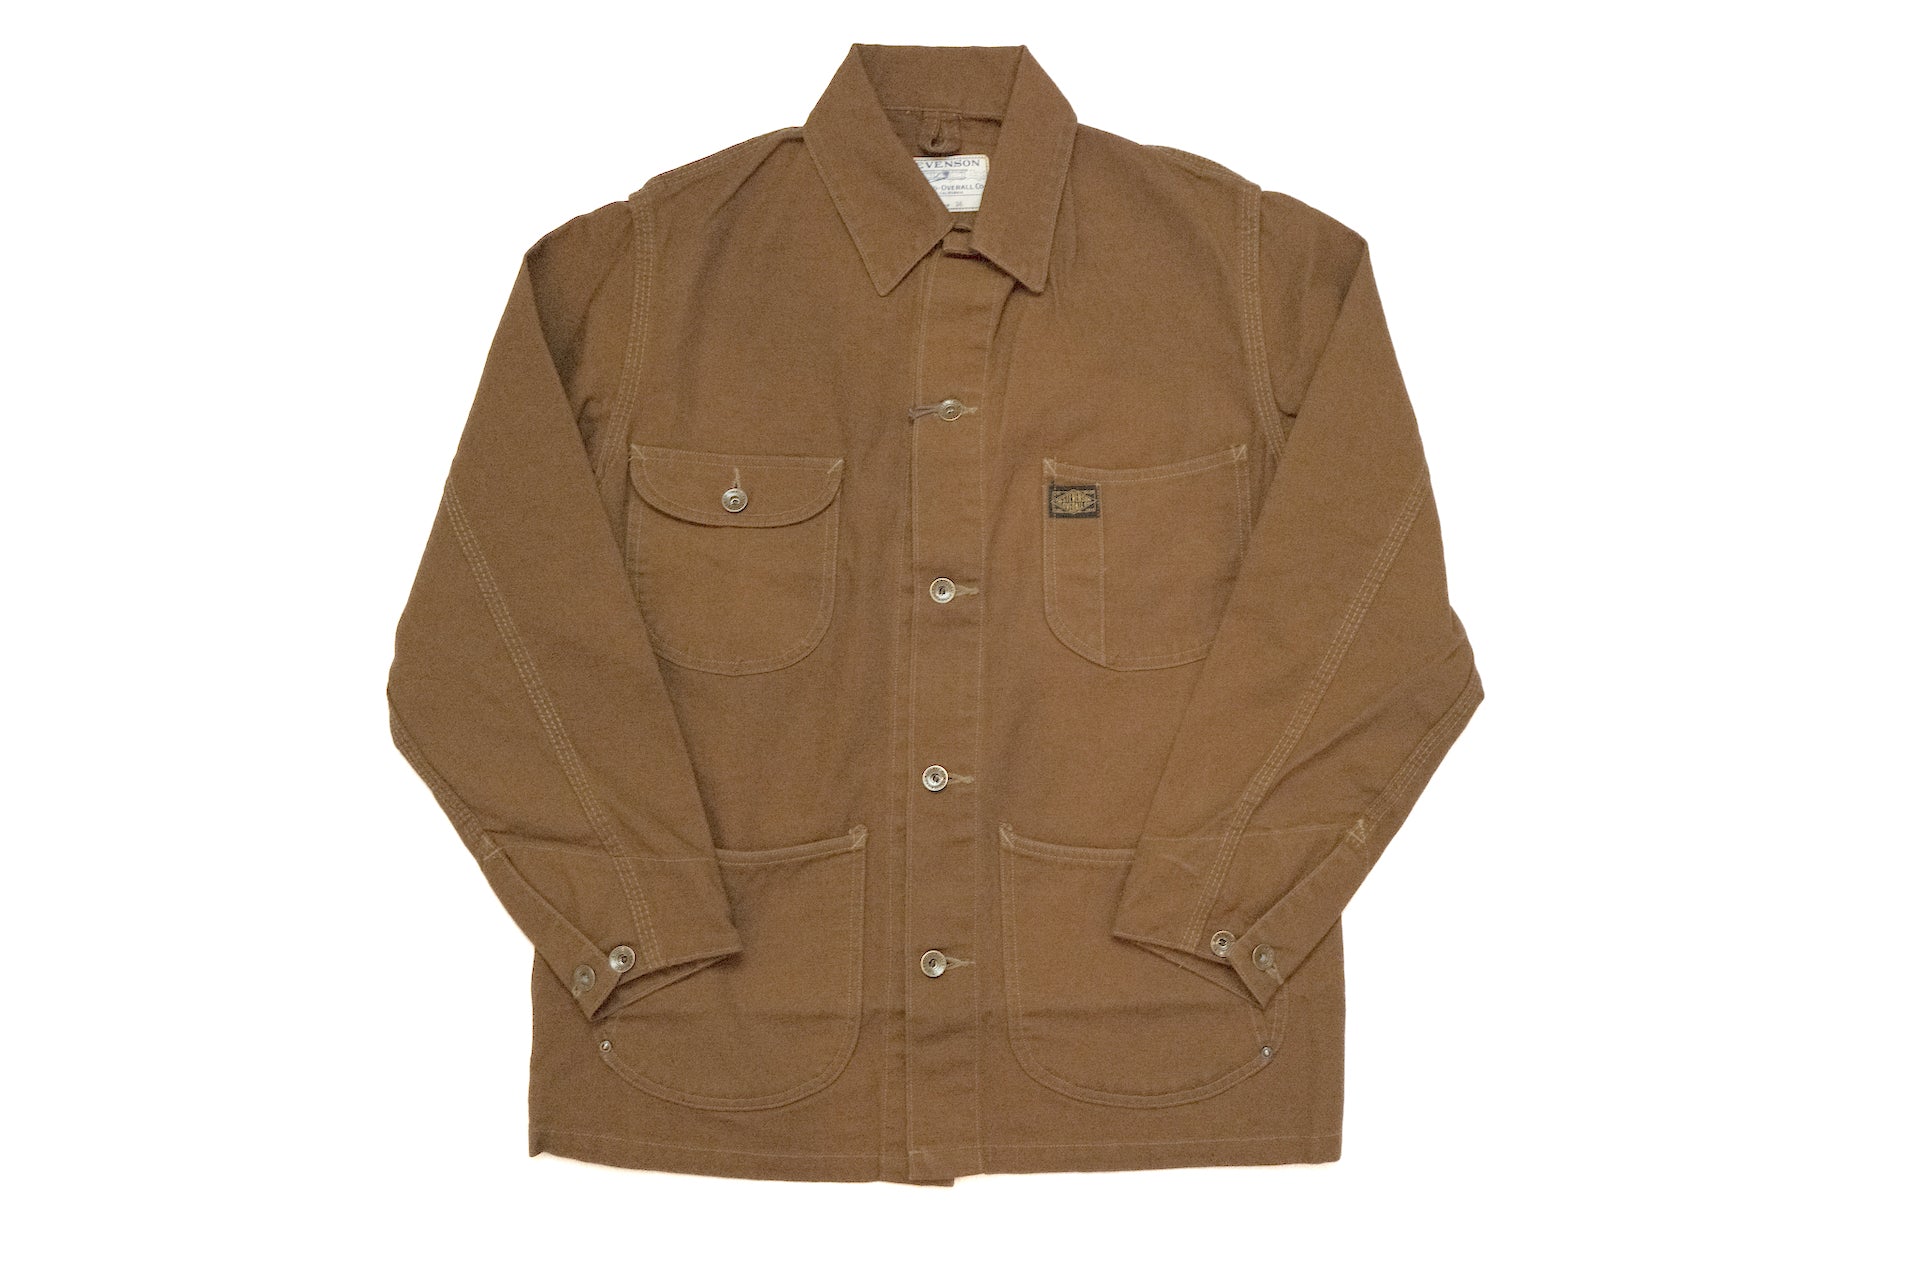 Stevenson Overall Co. 10.6oz 'Linesman' Duck Canvas Coverall (Brown)